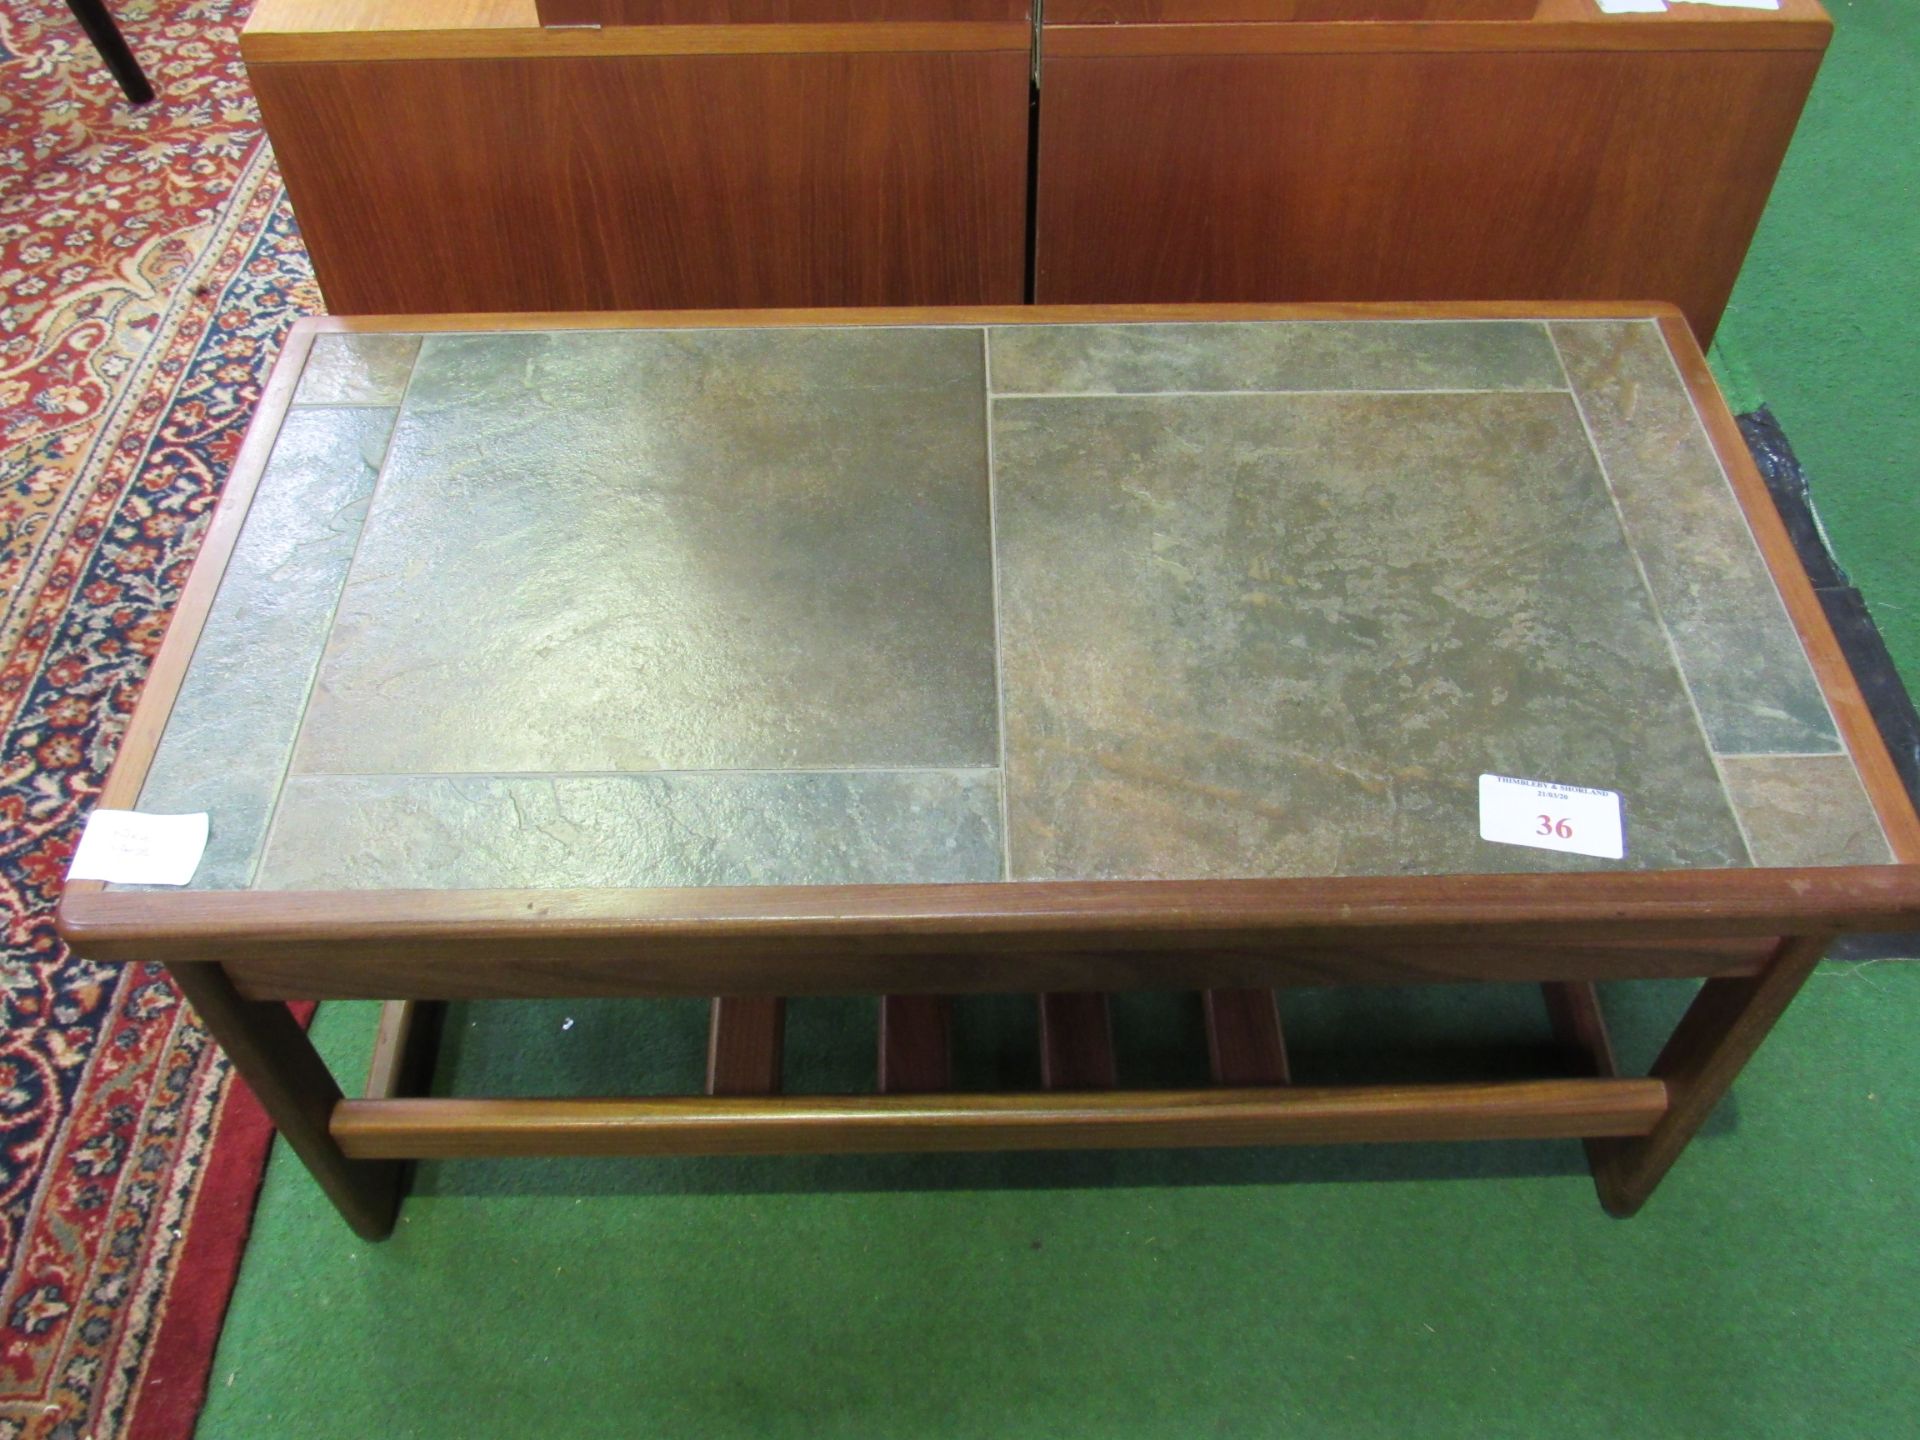 Teak tile-top coffee table by Anbercraft of Stoke-on-Trent, 85 x 44 x 39cms. Estimate £20-30. - Image 2 of 4